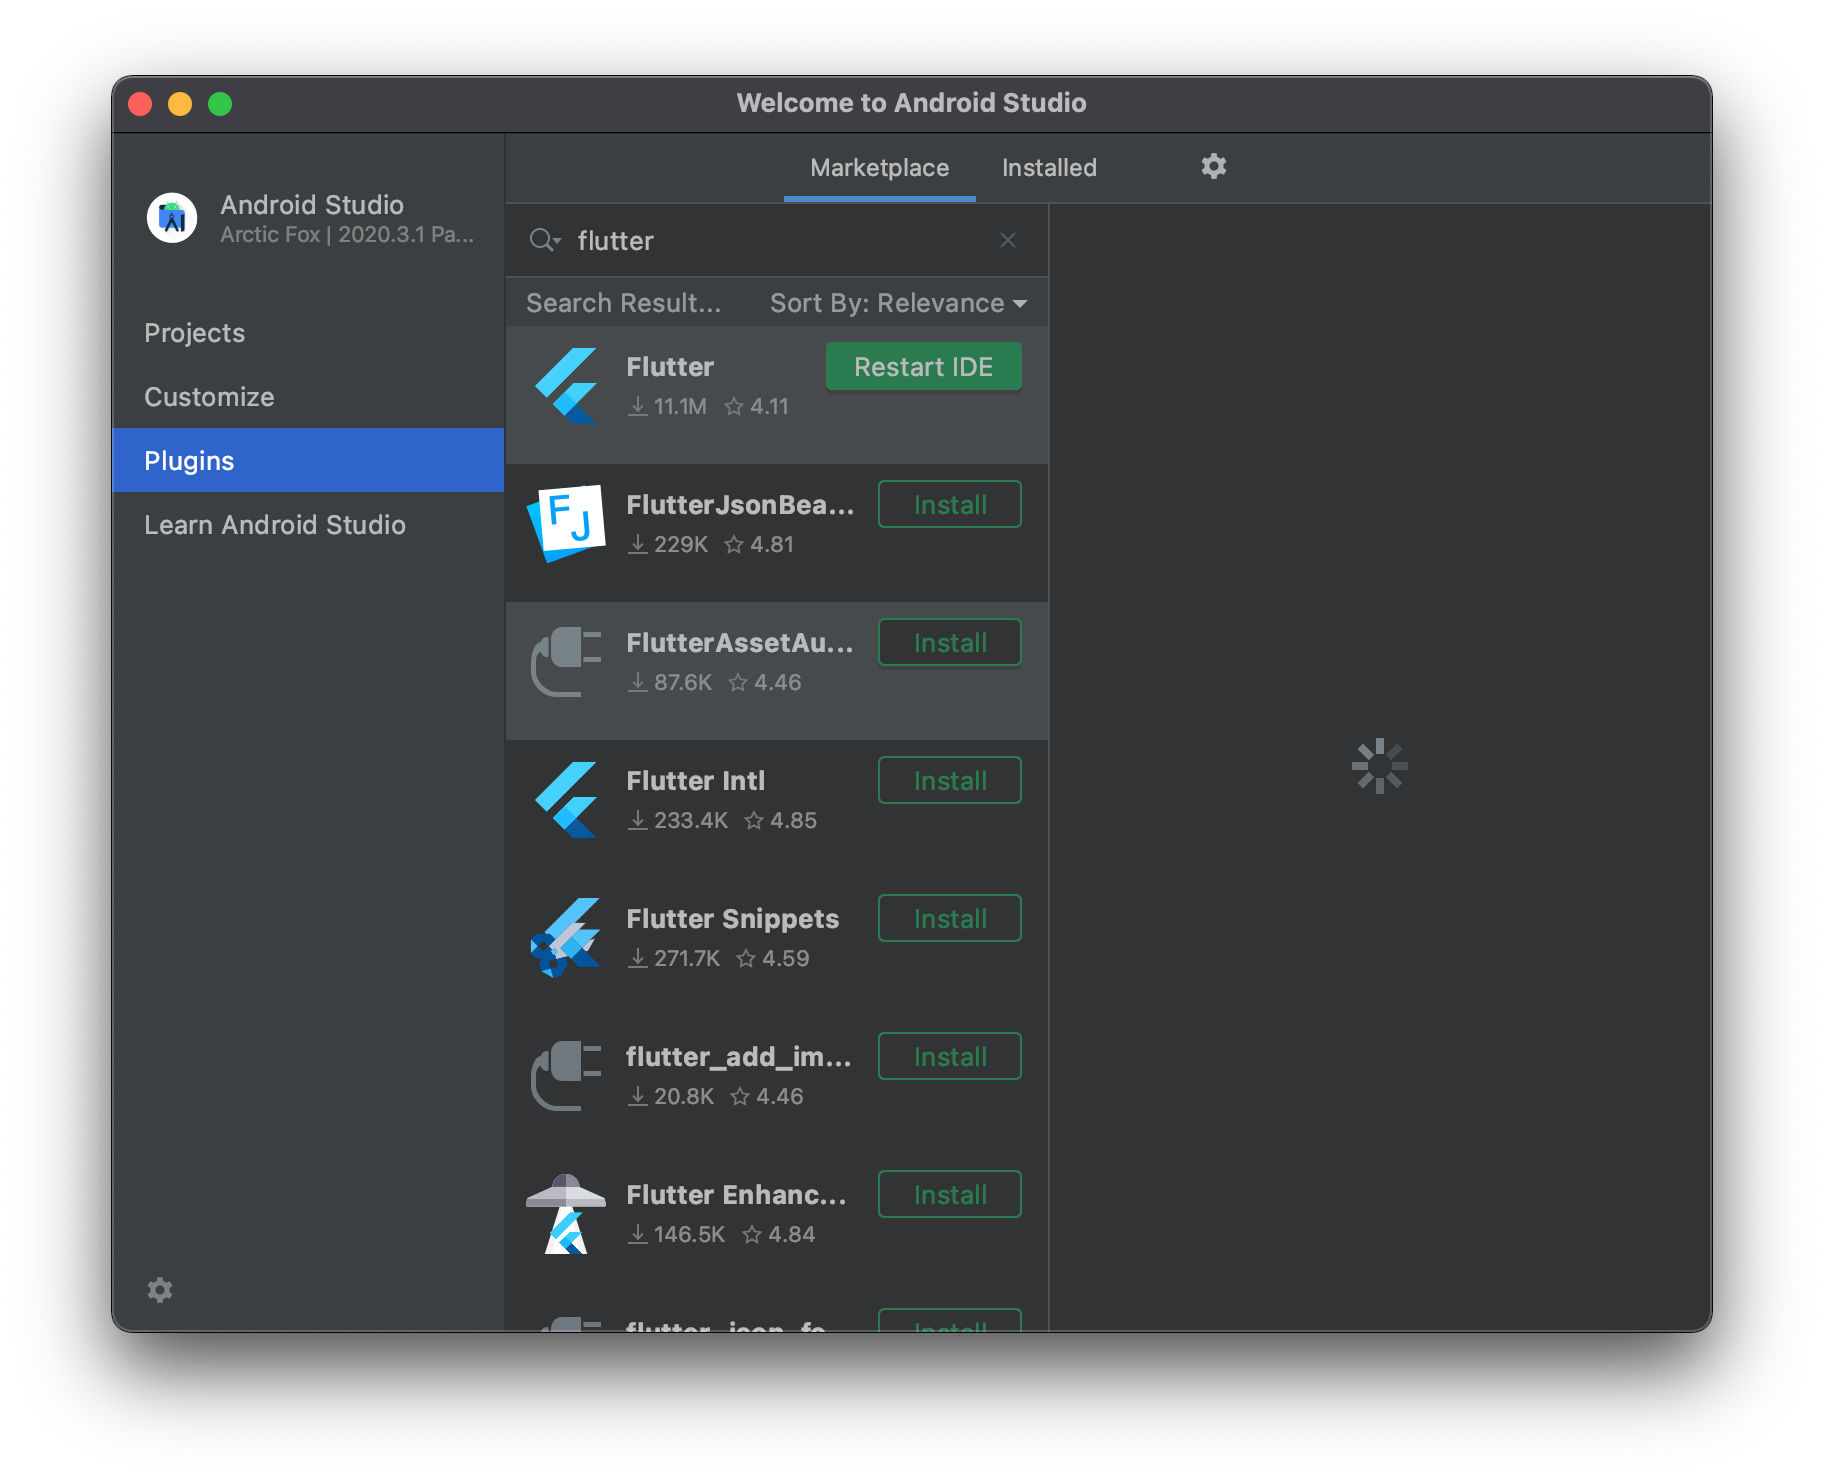 MacOS install android studio